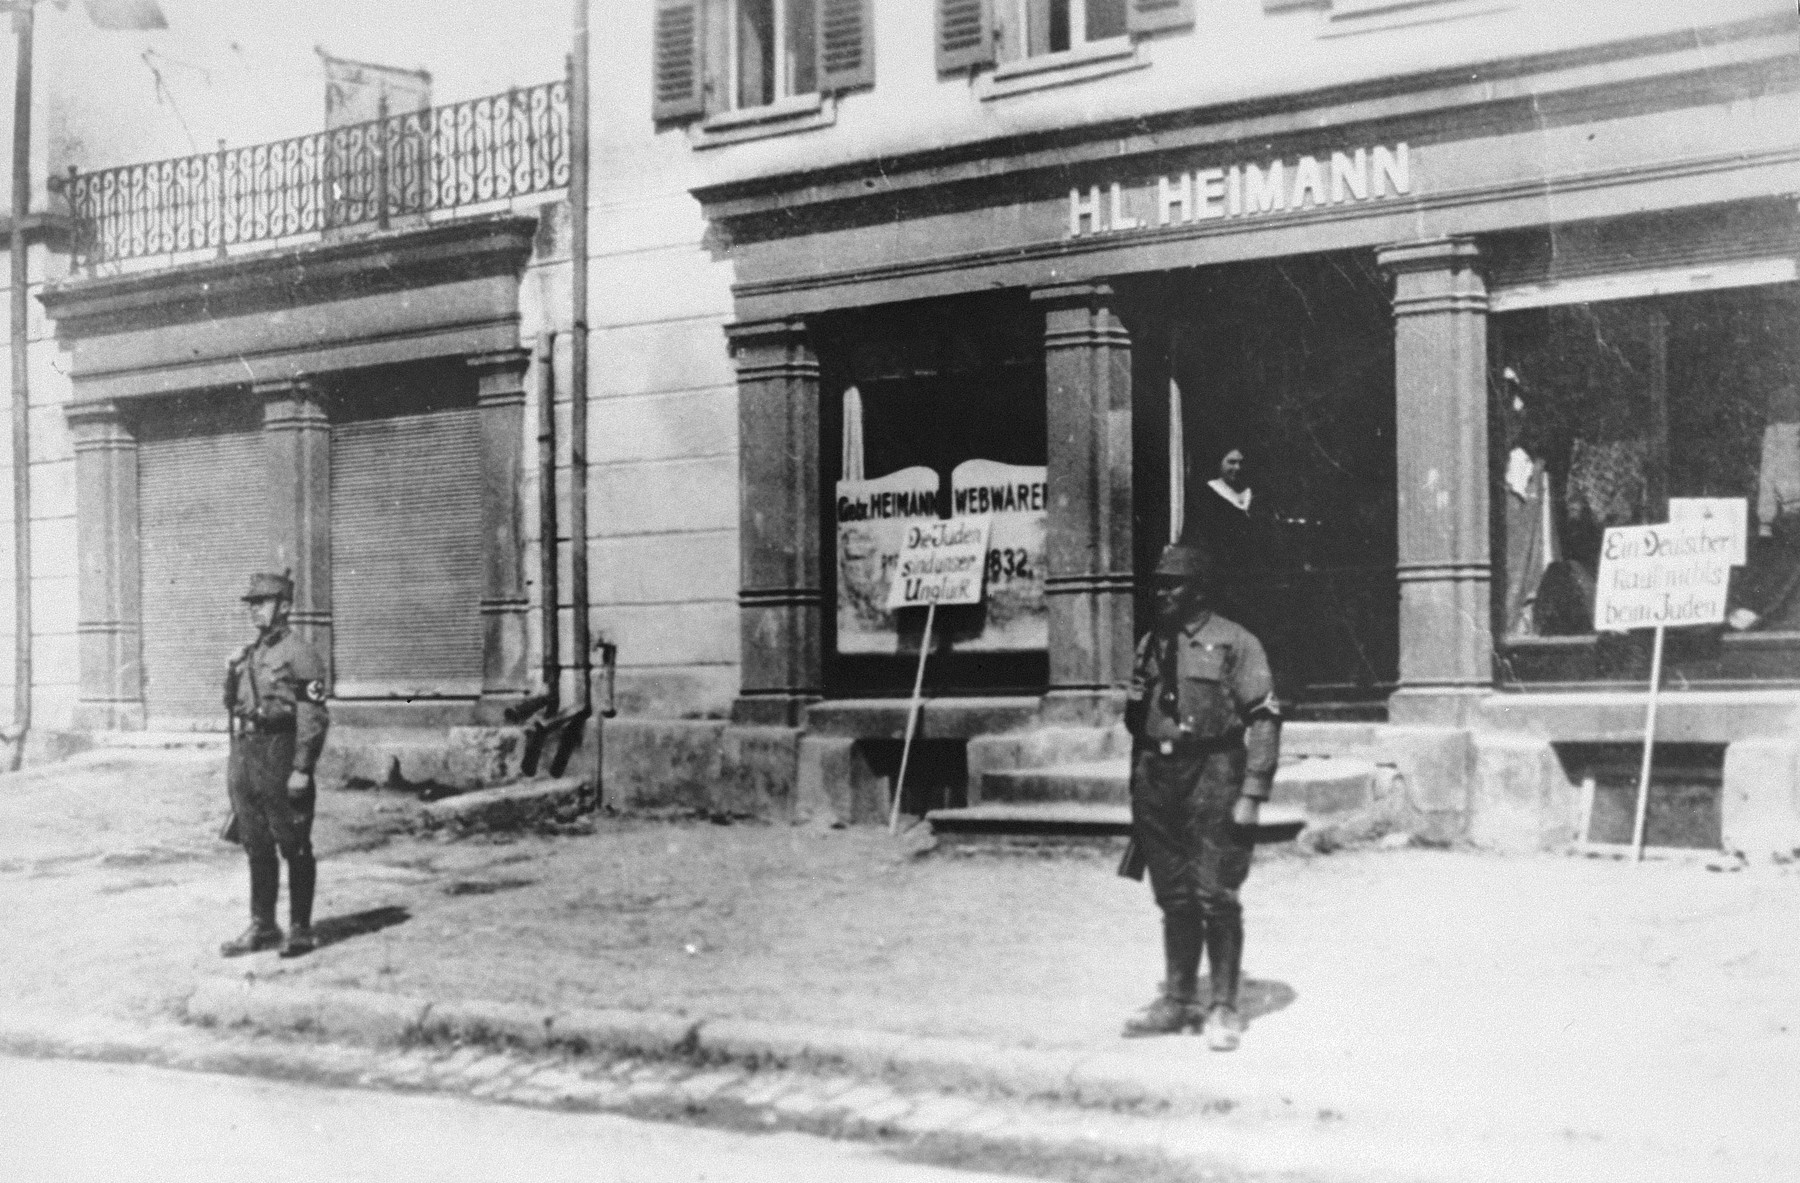 Two Nazi stormtroopers stand guard in front of the H. L. Heimann store in Bopfingen, to prevent would-be shoppers from violating the Nazi boycott of Jewish-owned businesses.  Two signs have been placed in front of the store.  The sign on the left reads: "The Jews are our Misfortune."  The sign on the right reads:  "A German buys nothing from Jews."

The business belonged to the donor's father.  Pictured at the entrance to the store is Sali Heimann, who was later killed in a concentration camp in Riga.